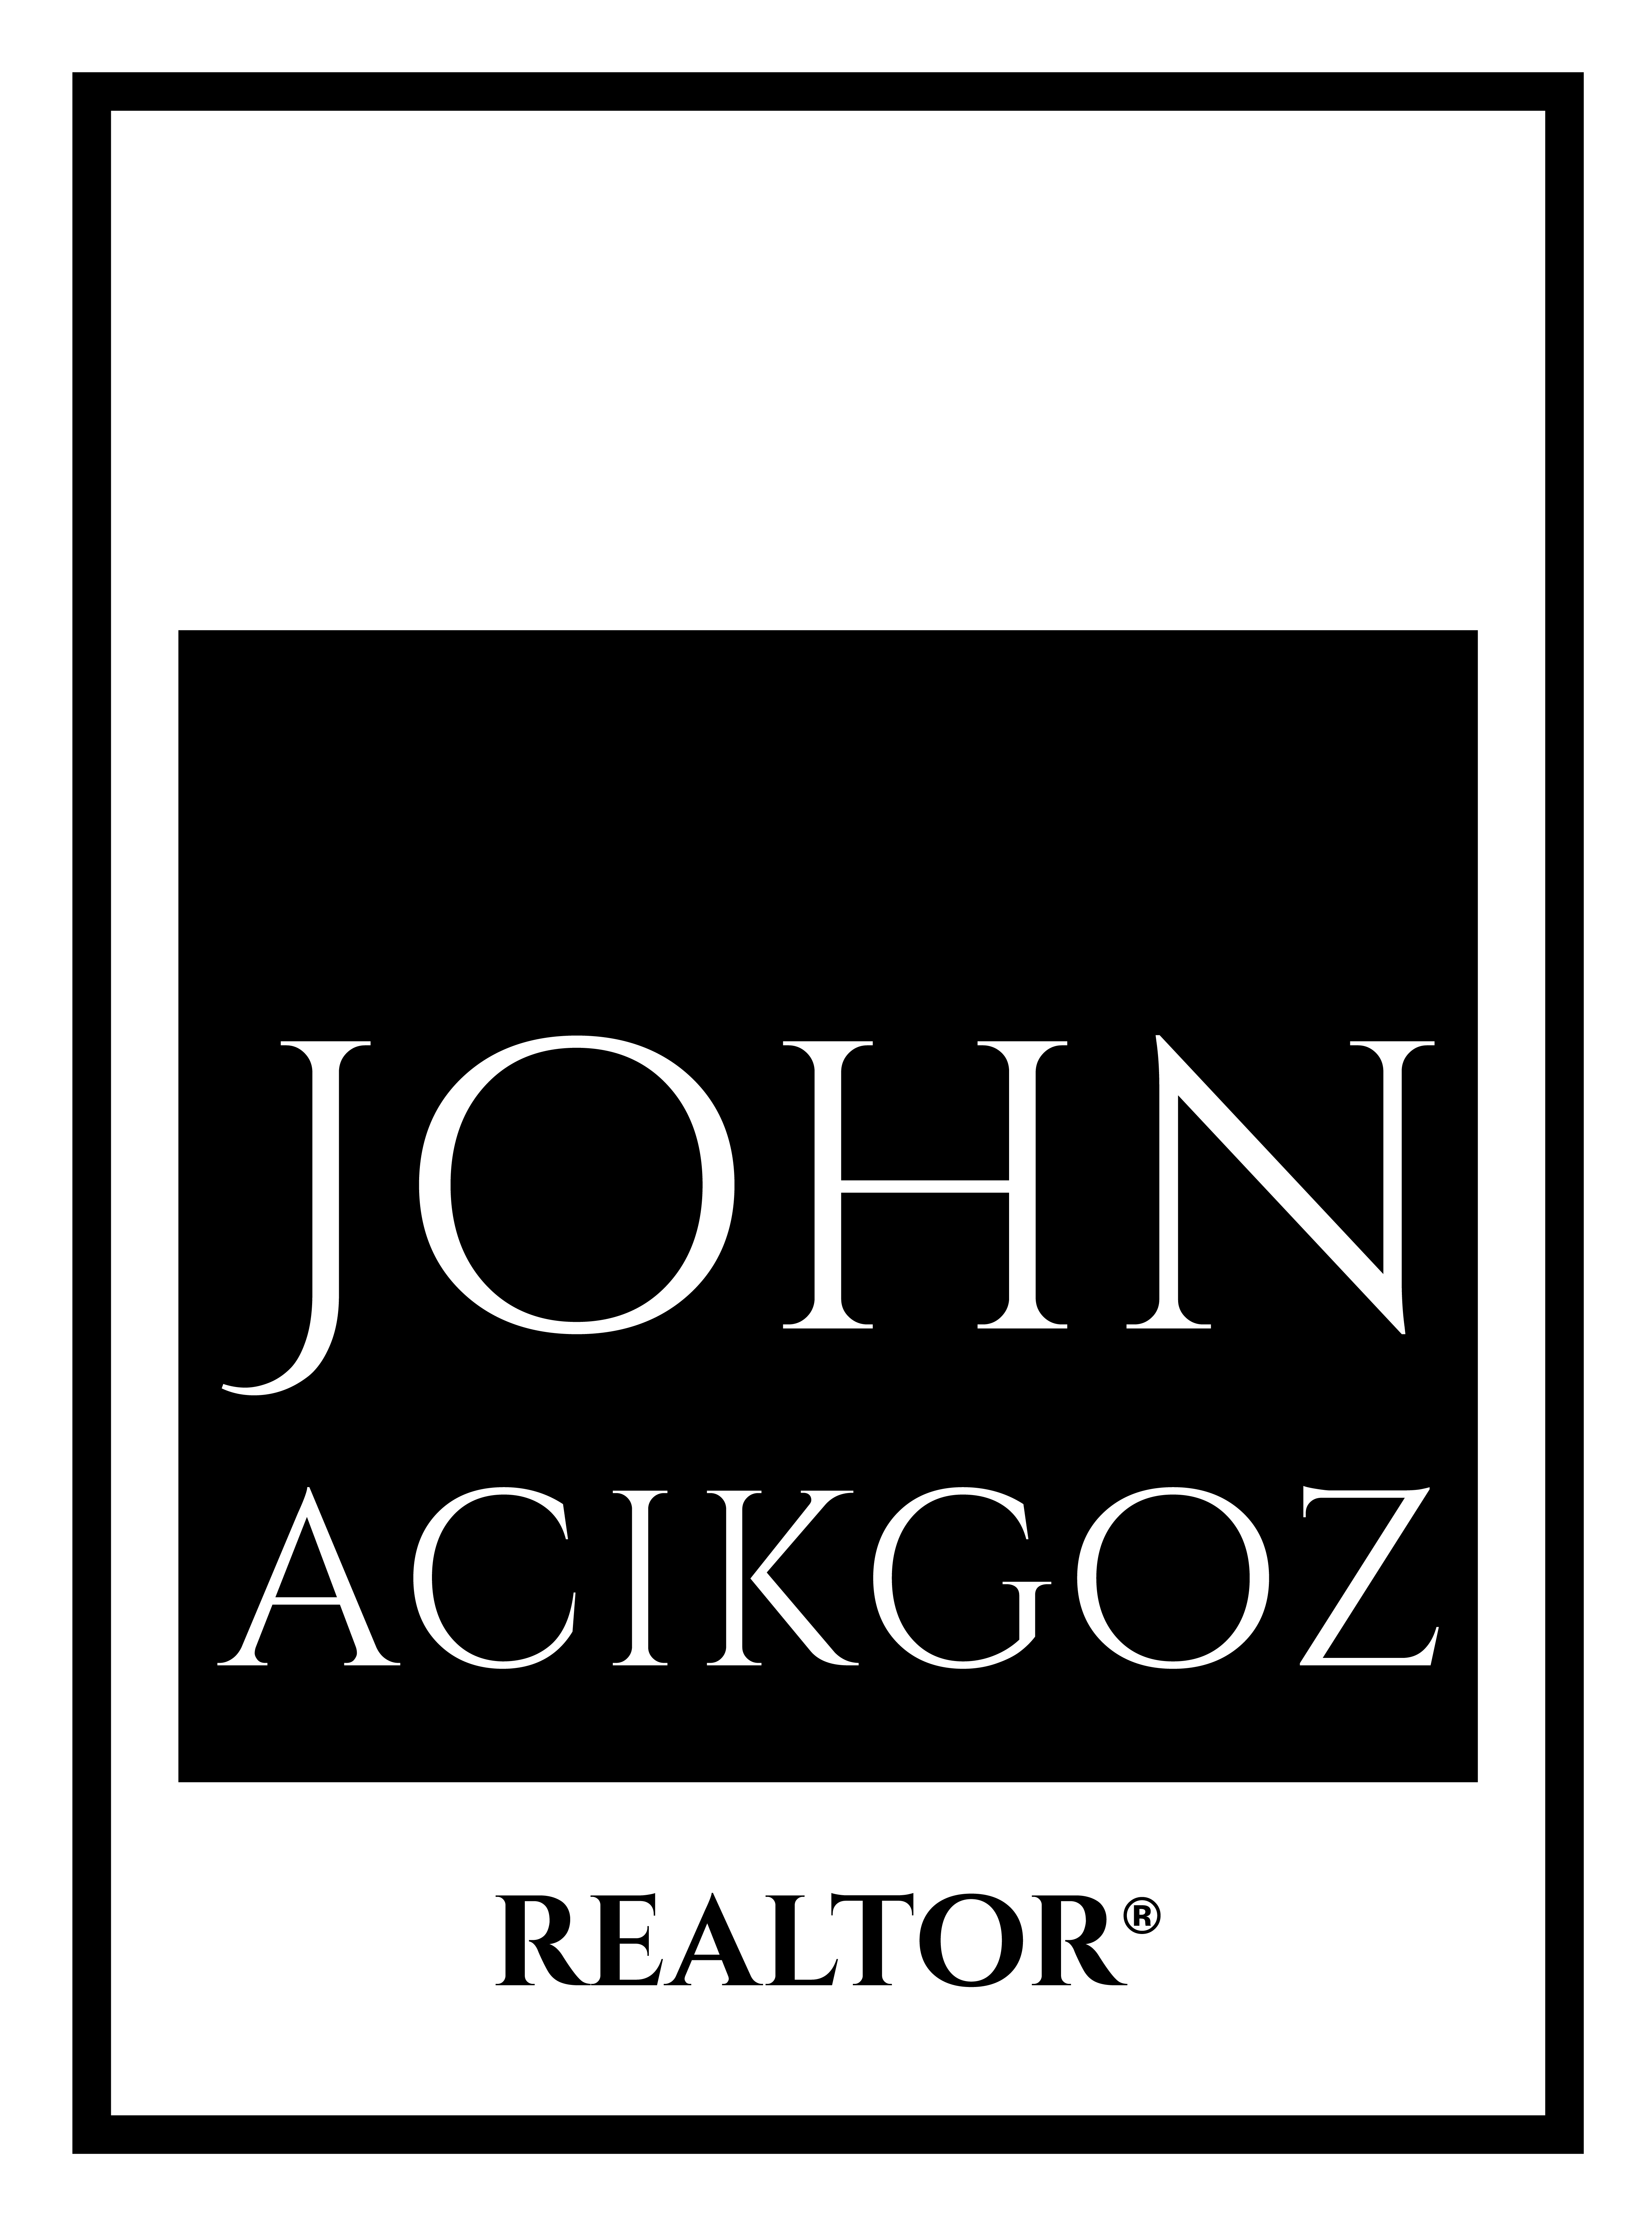 A text banner with the word REALTOR